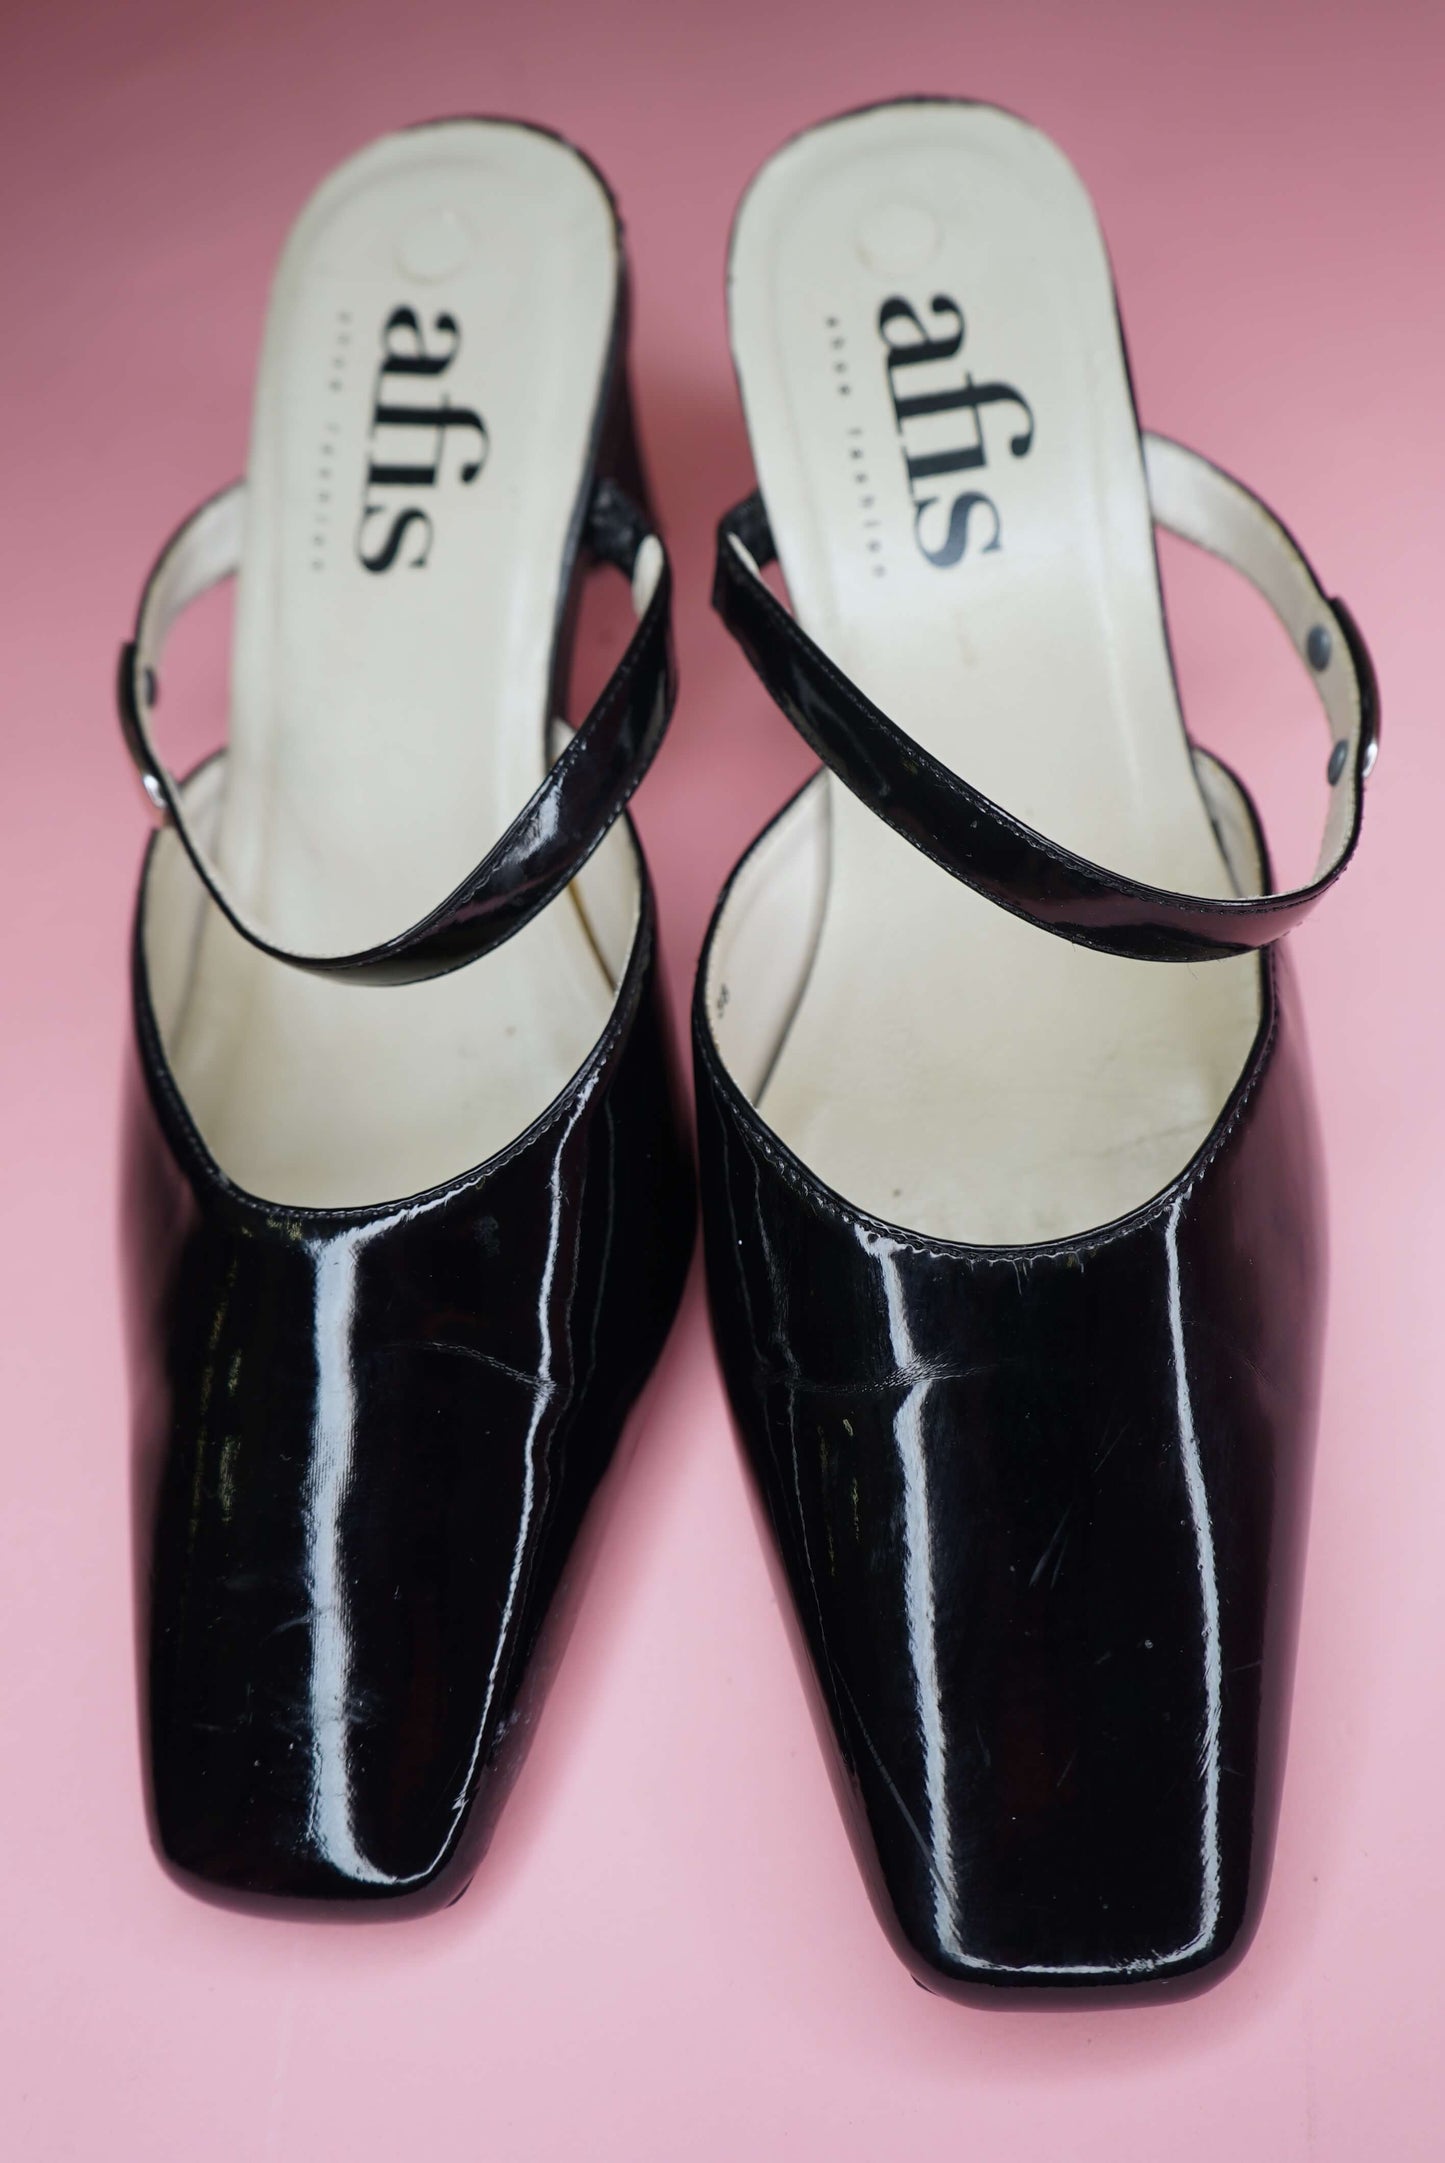 Black Patent Leather Mules Vintage Front Strap Mules Silver Buckle Strap Shiny Shoes Two Strap Heels UK Size 4.5-5/ EUR 37.5-38